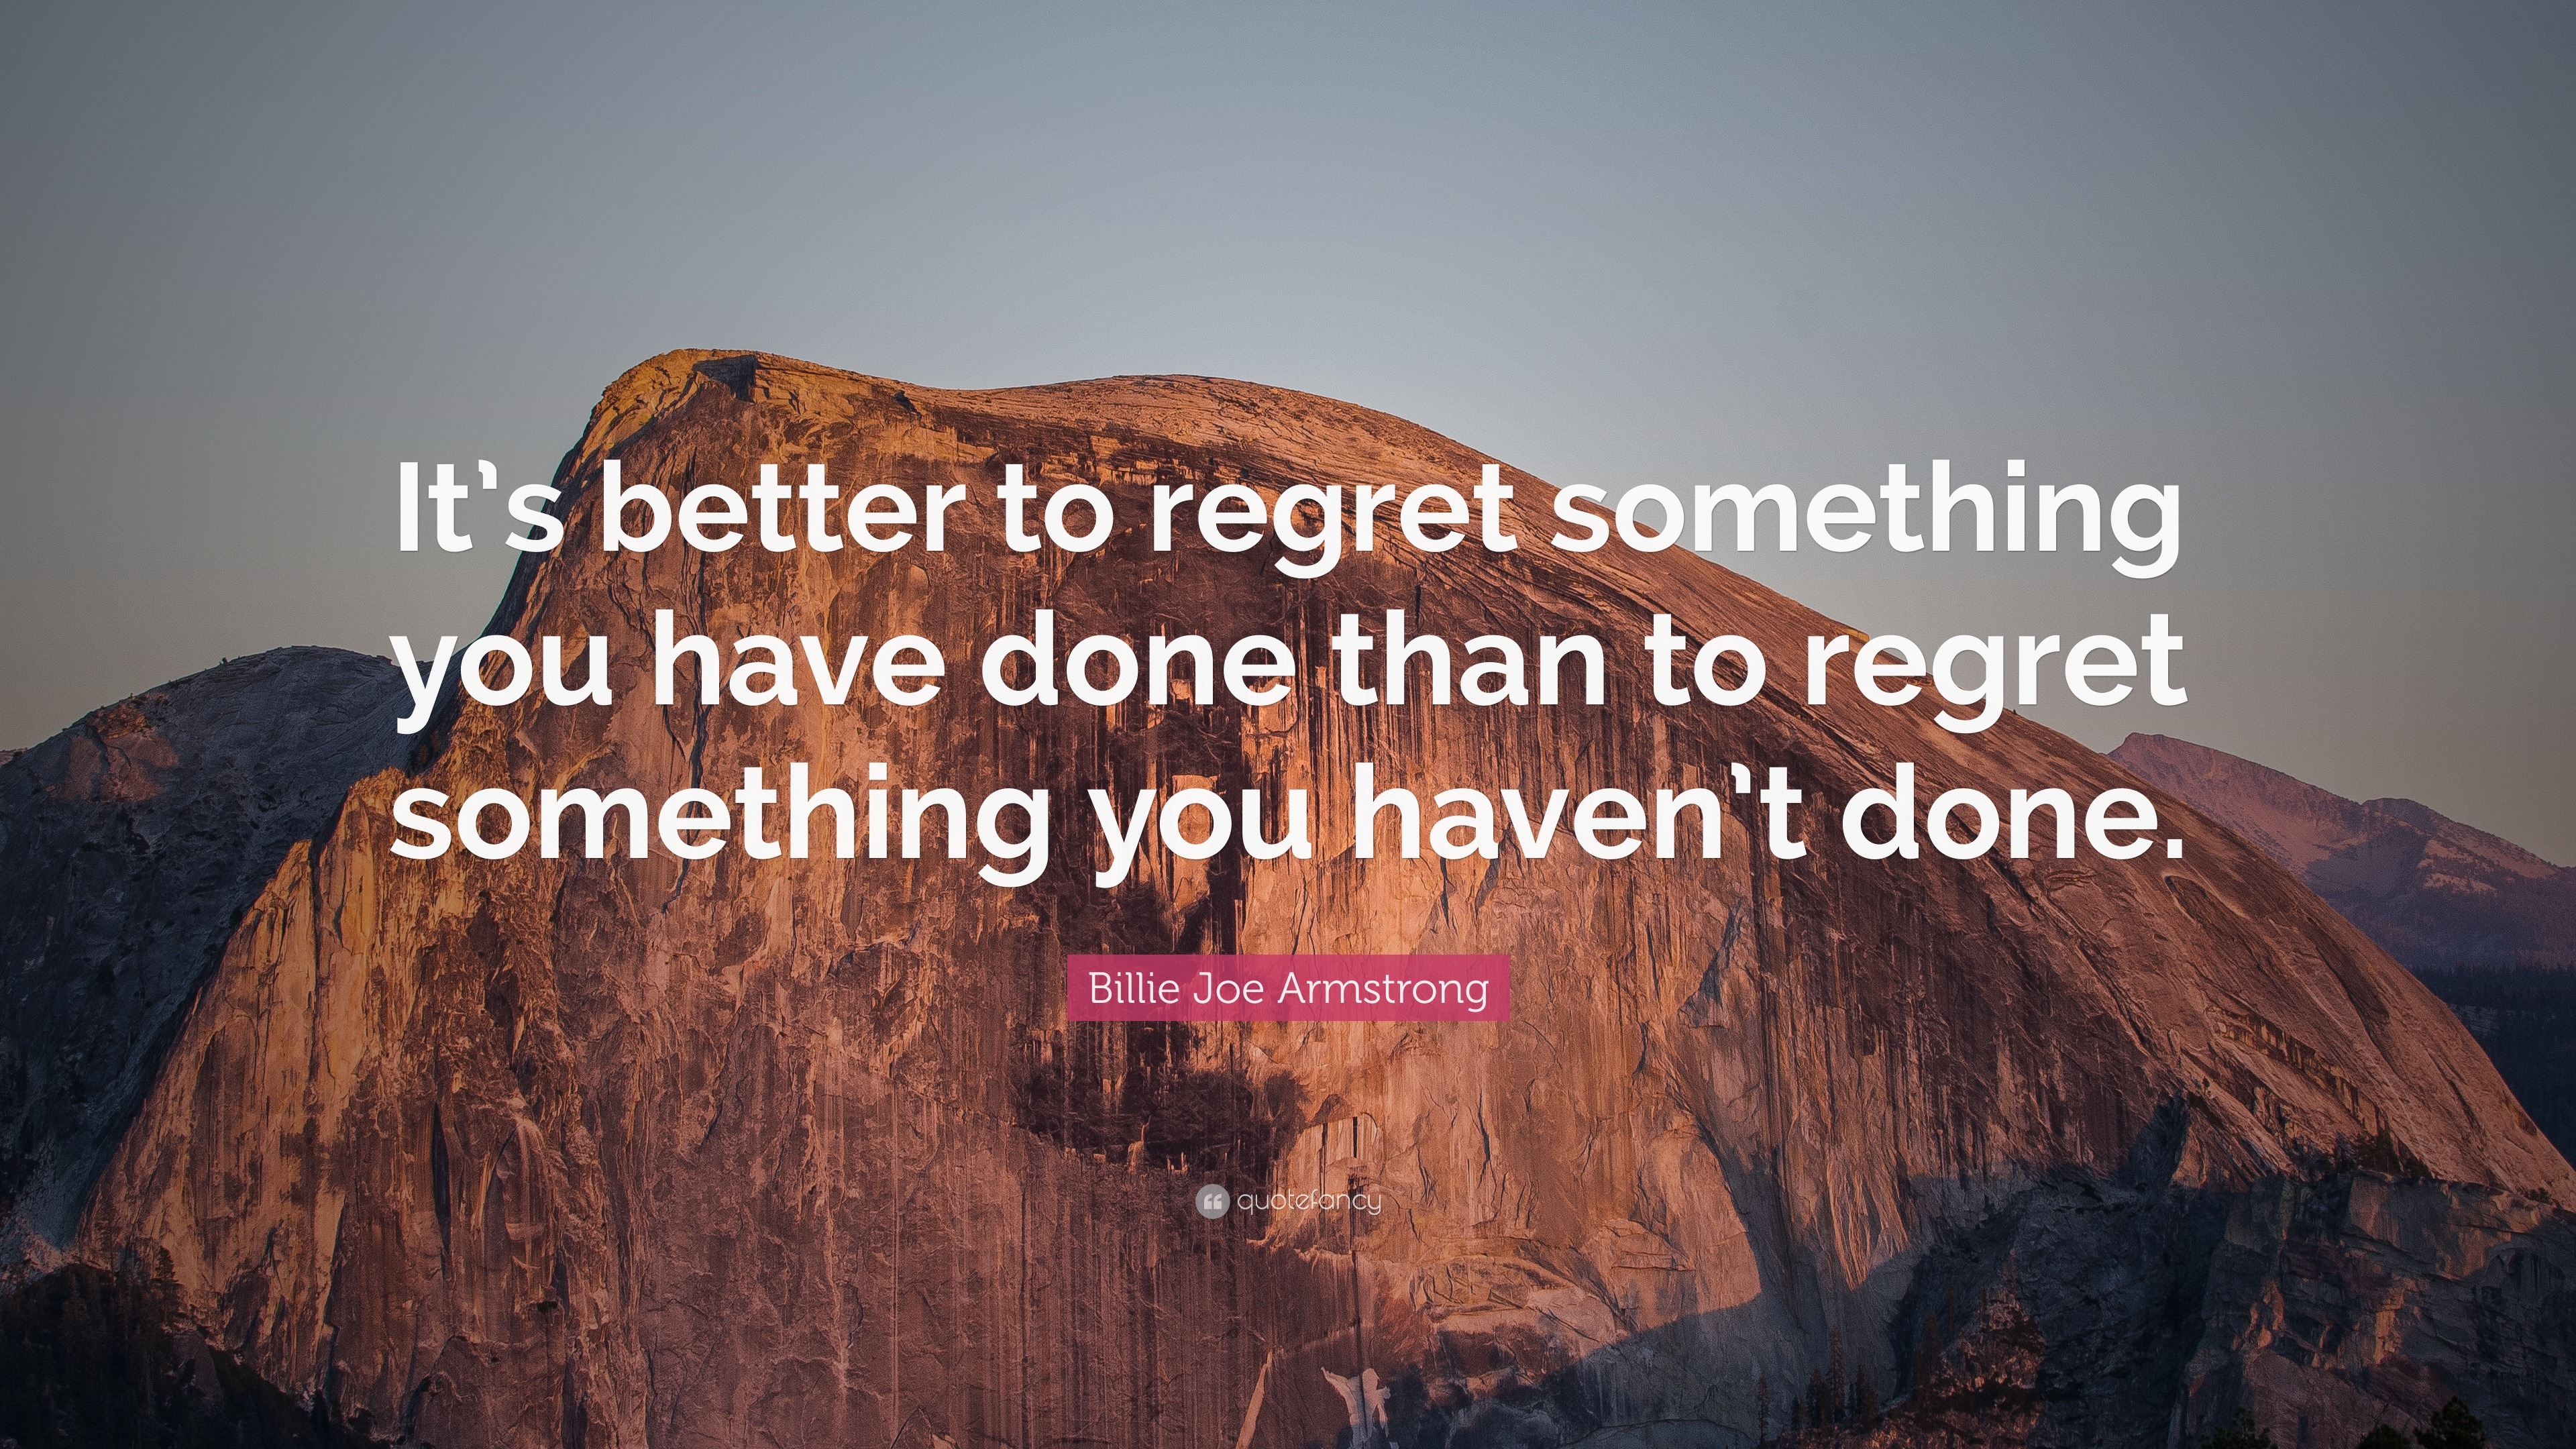 Billie Joe Armstrong Quote: It s better to regret something you have